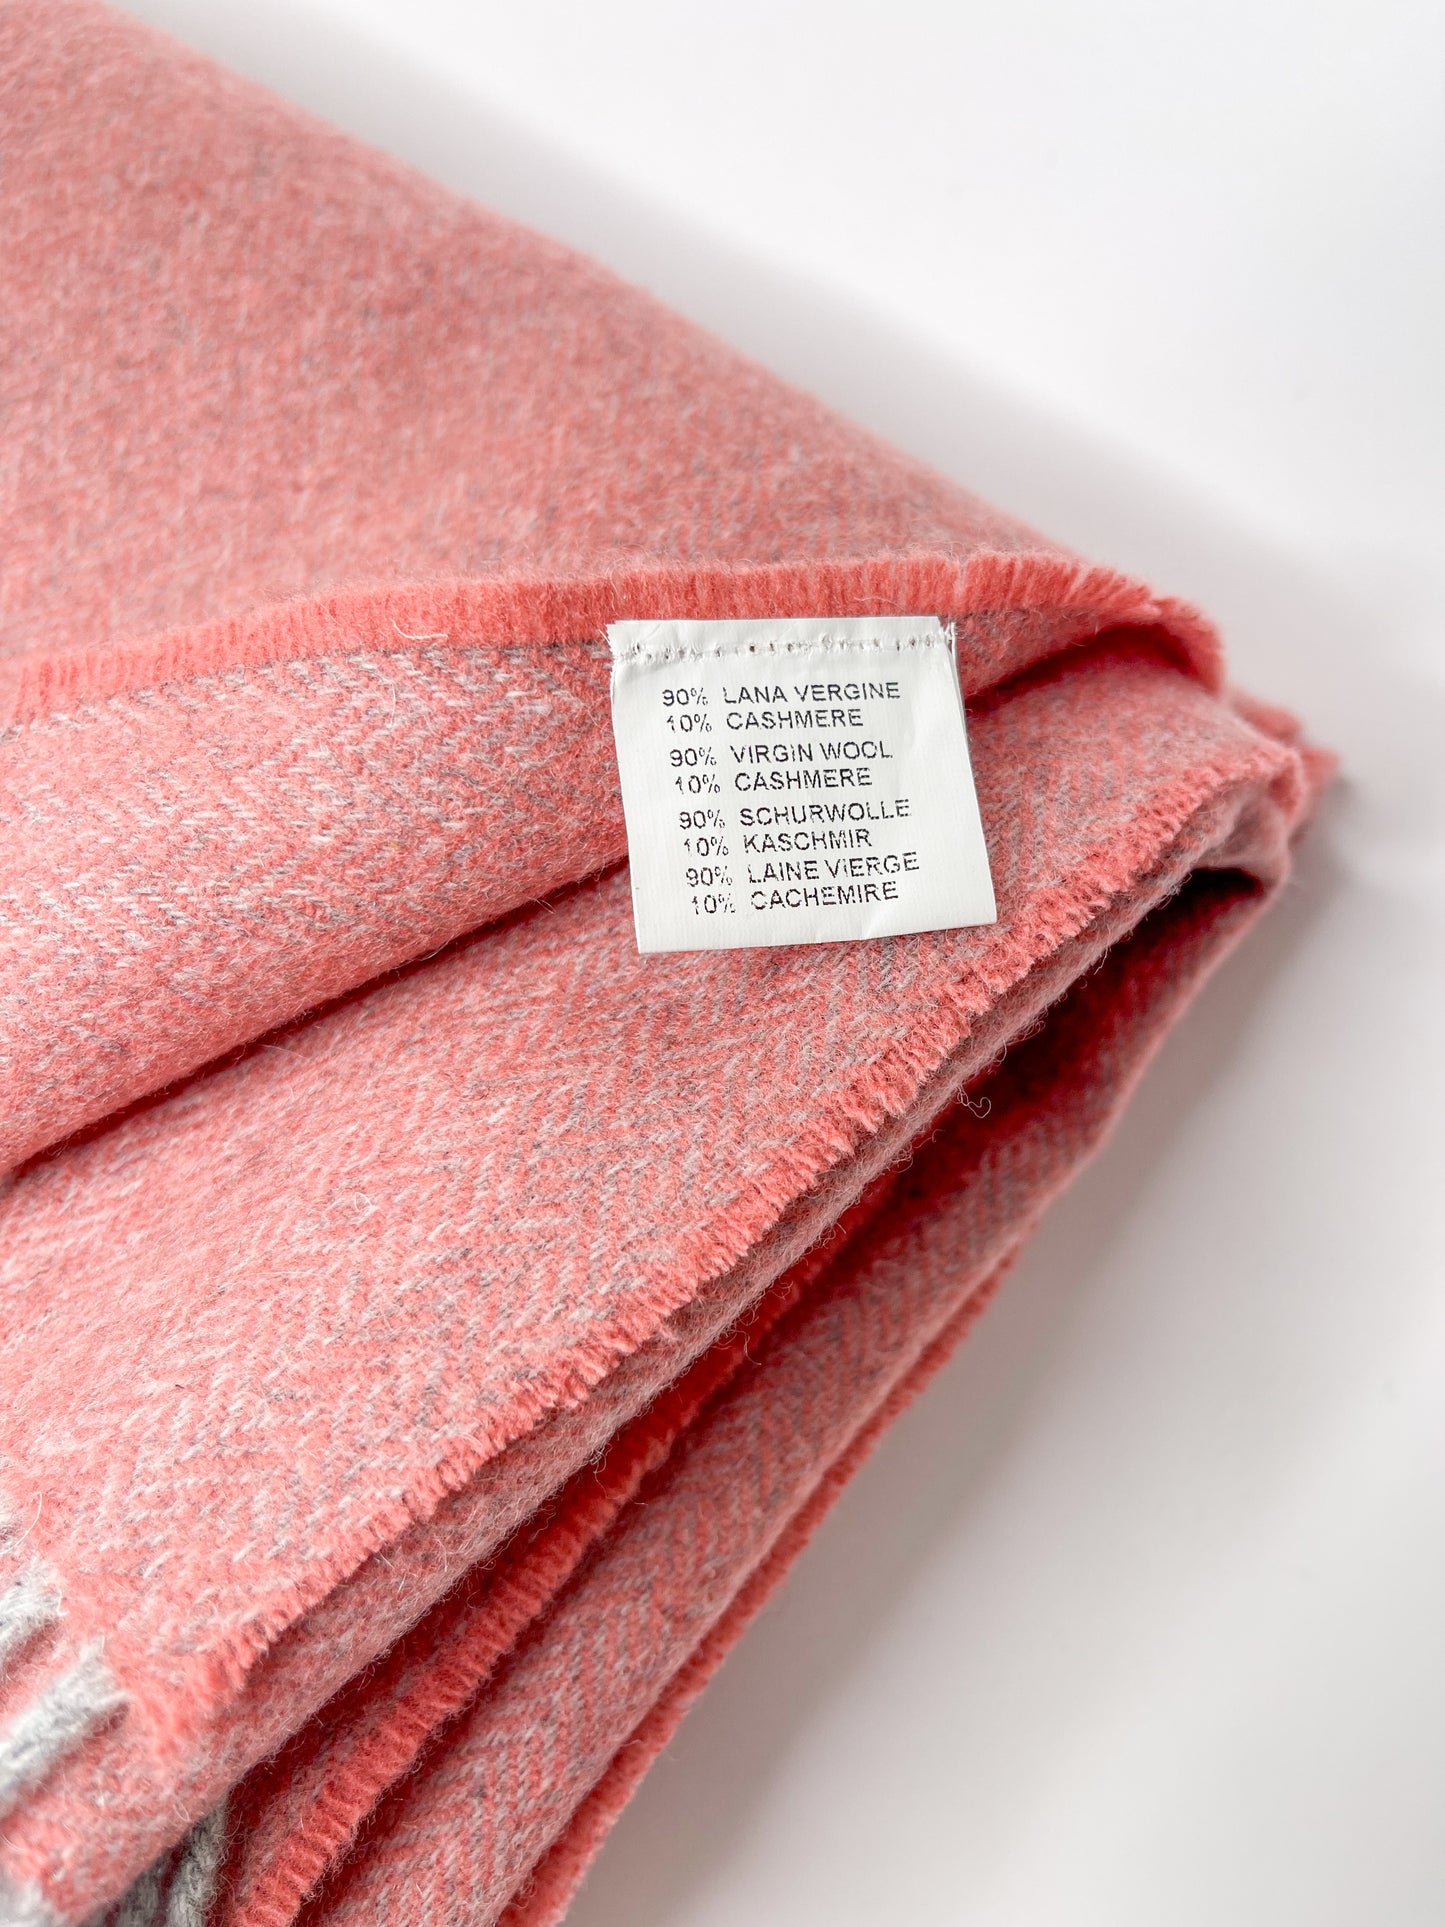 Merino wool and cashmere blanket "Pink Evening"